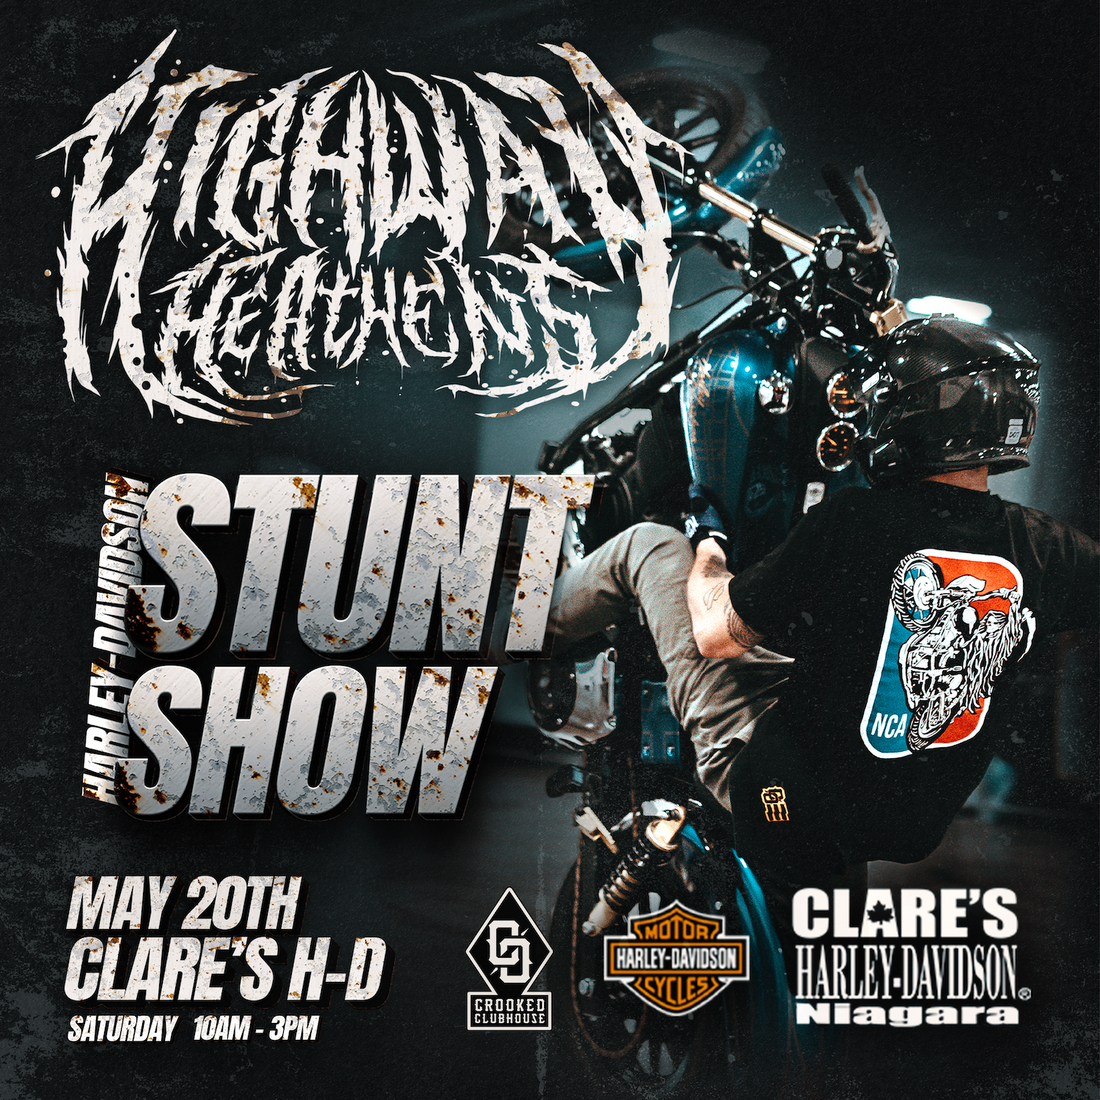 [CANCELLED] MAY 20, CLARE'S H-D